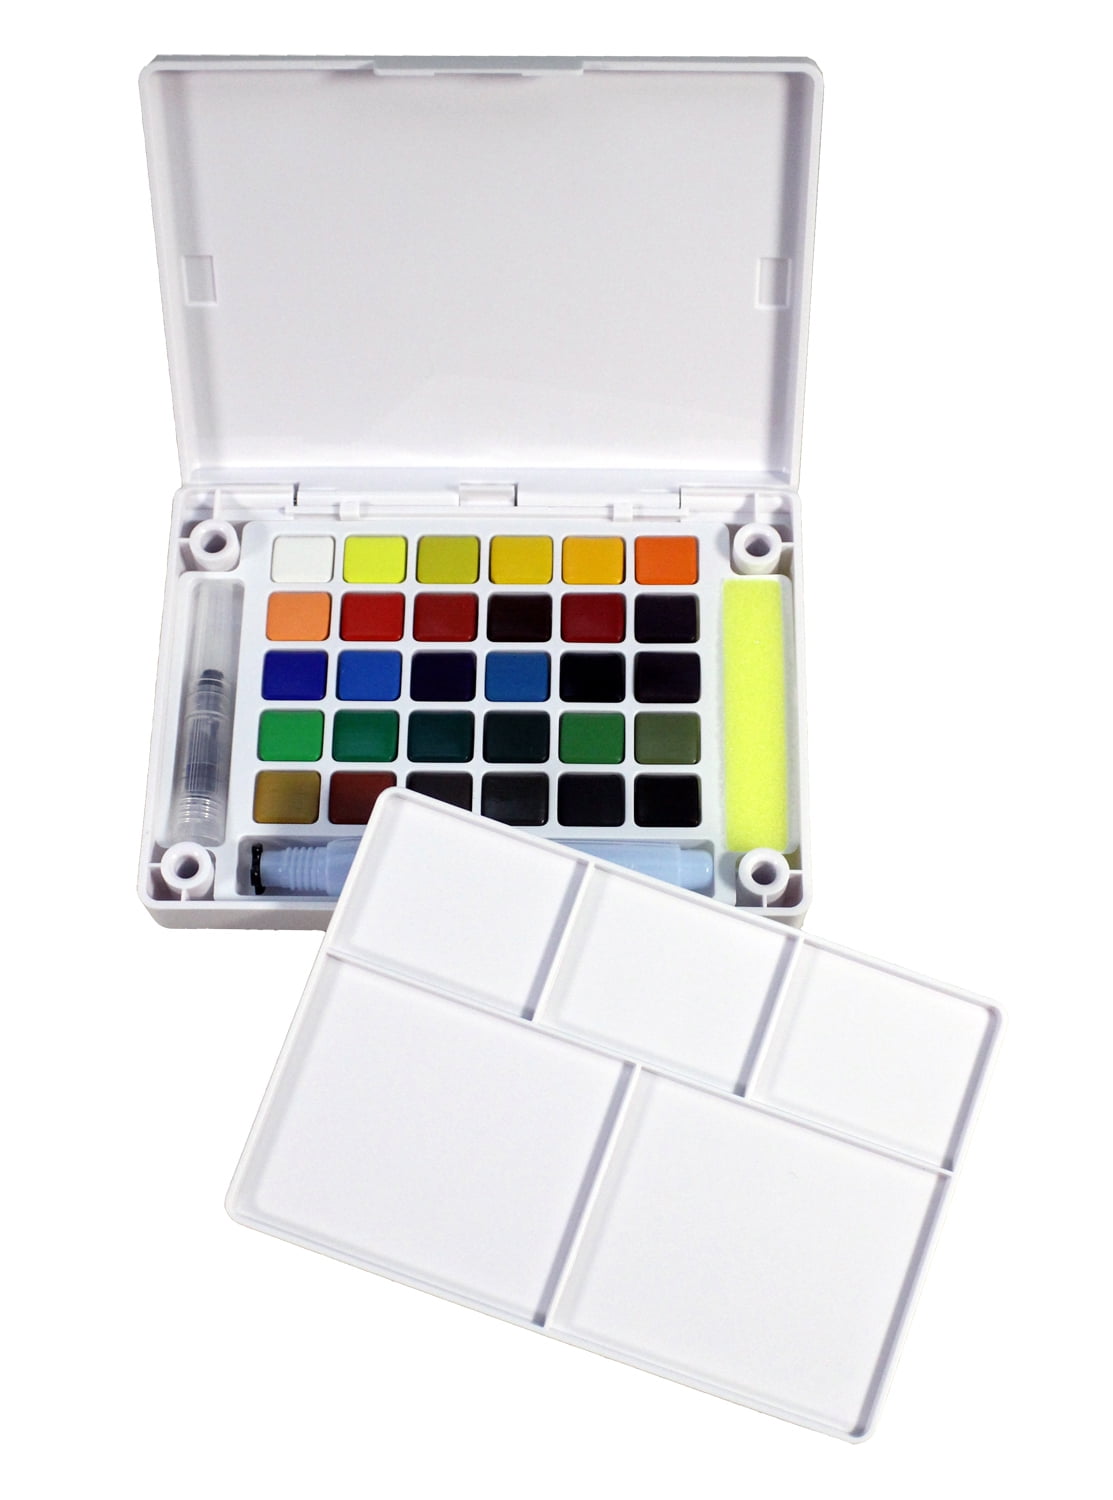 LEAVING THE HOUSE TO DRAW?! - Koi Watercolor Travel Kit 